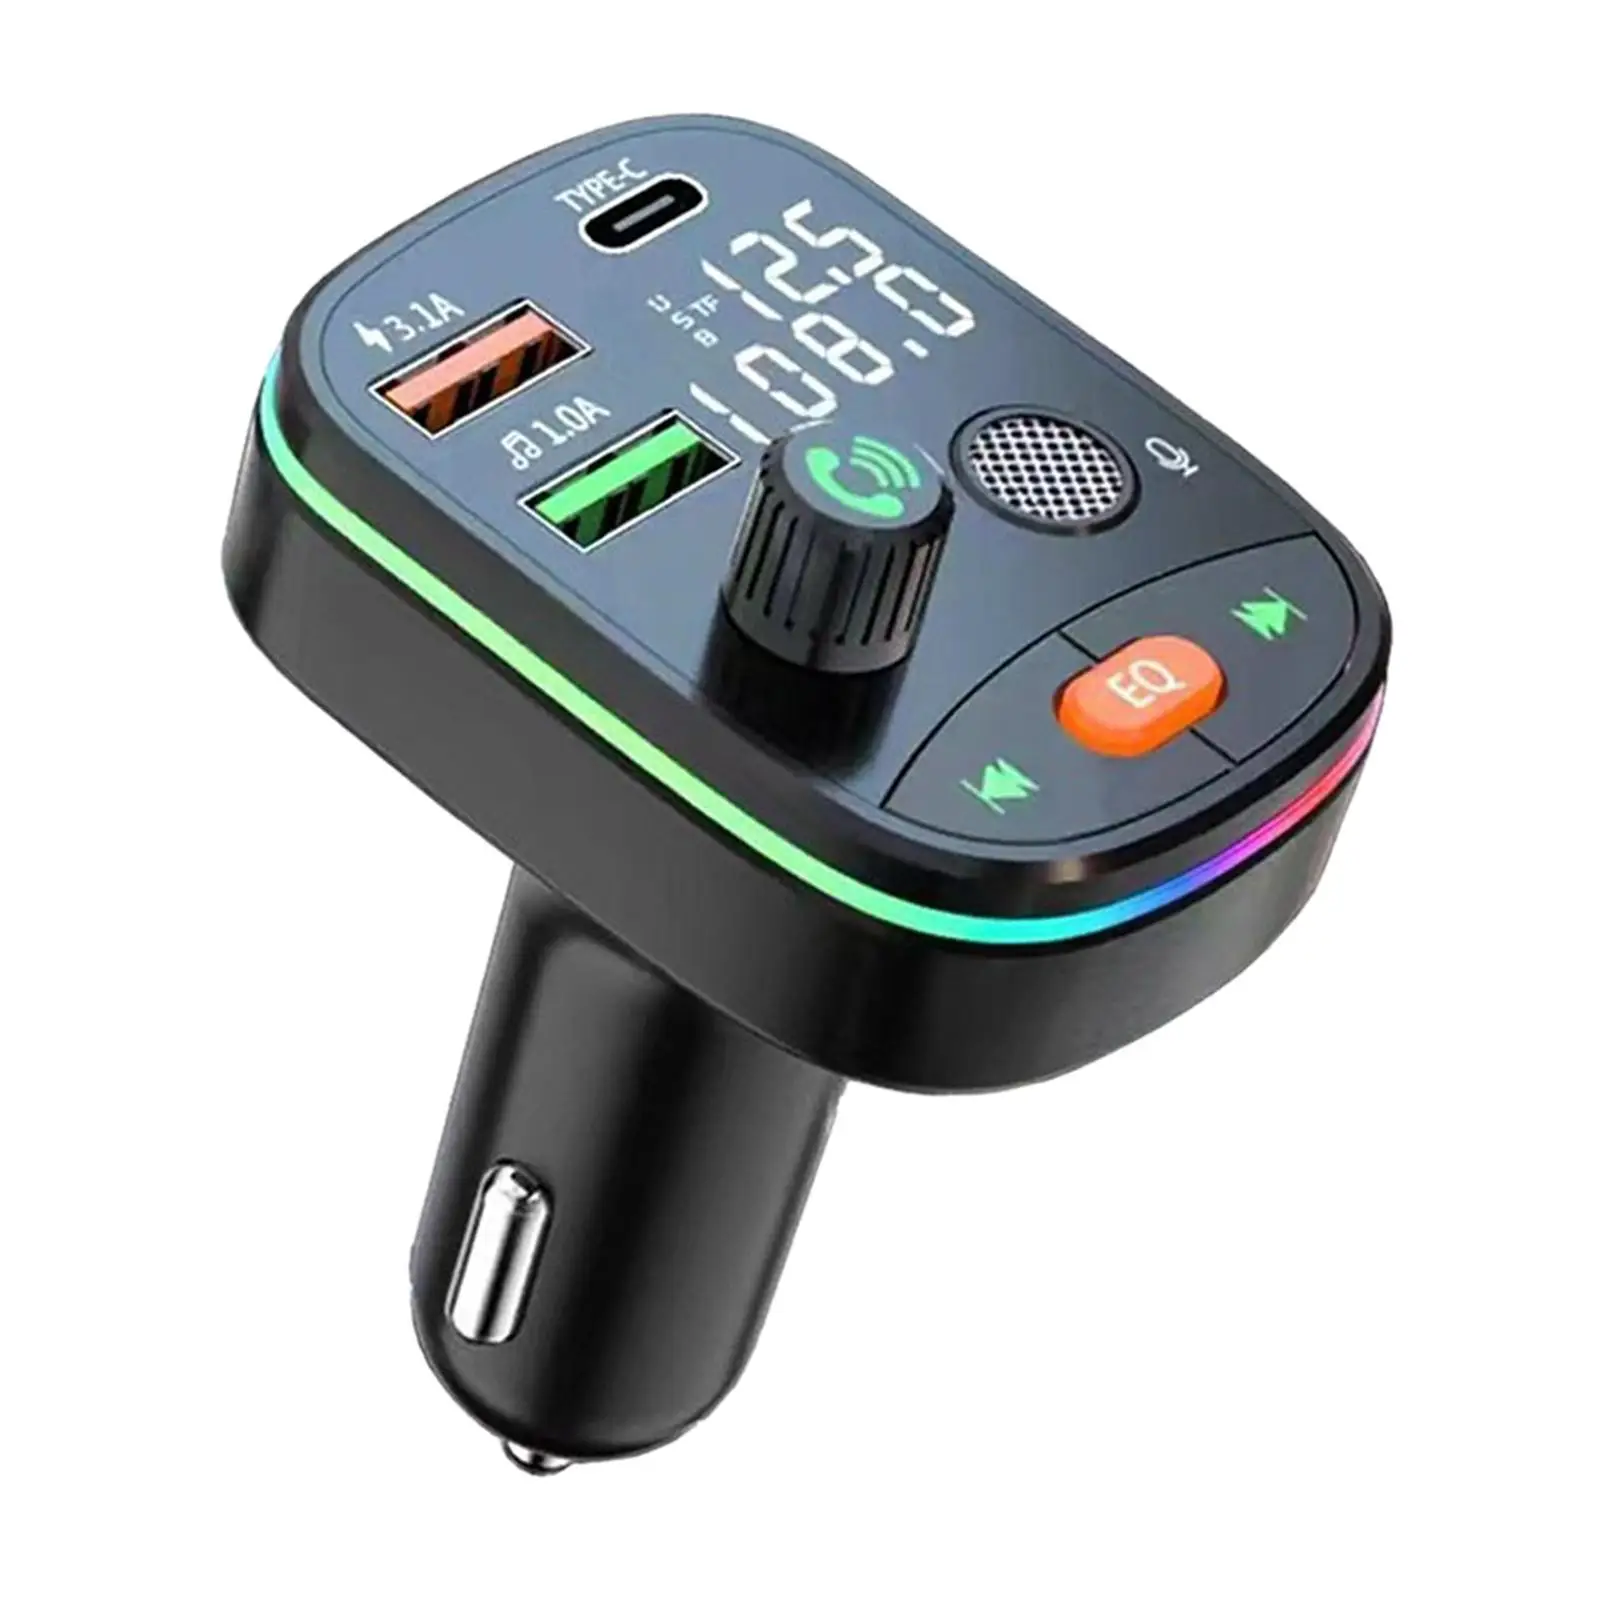 Bluetooth FM Transmitter Handsfree Calling Music Player 80x57x42mm Easy to Use